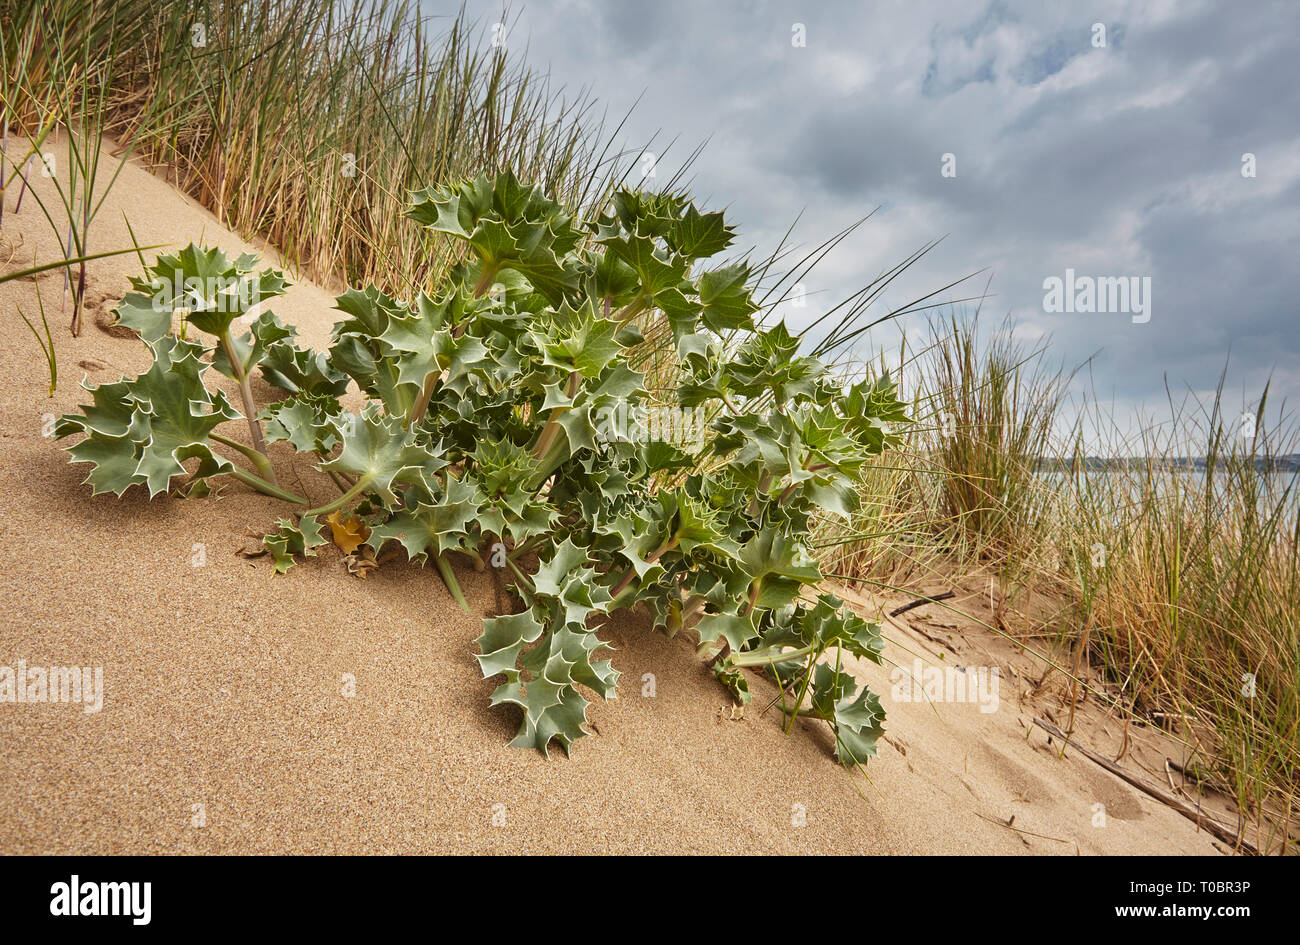 Sea Holly, Eryngium maritimum, in flower in sand dunes at Crow Point, in the mouth of the Taw and Torridge Rivers, north Devon, Great Britain. Stock Photo